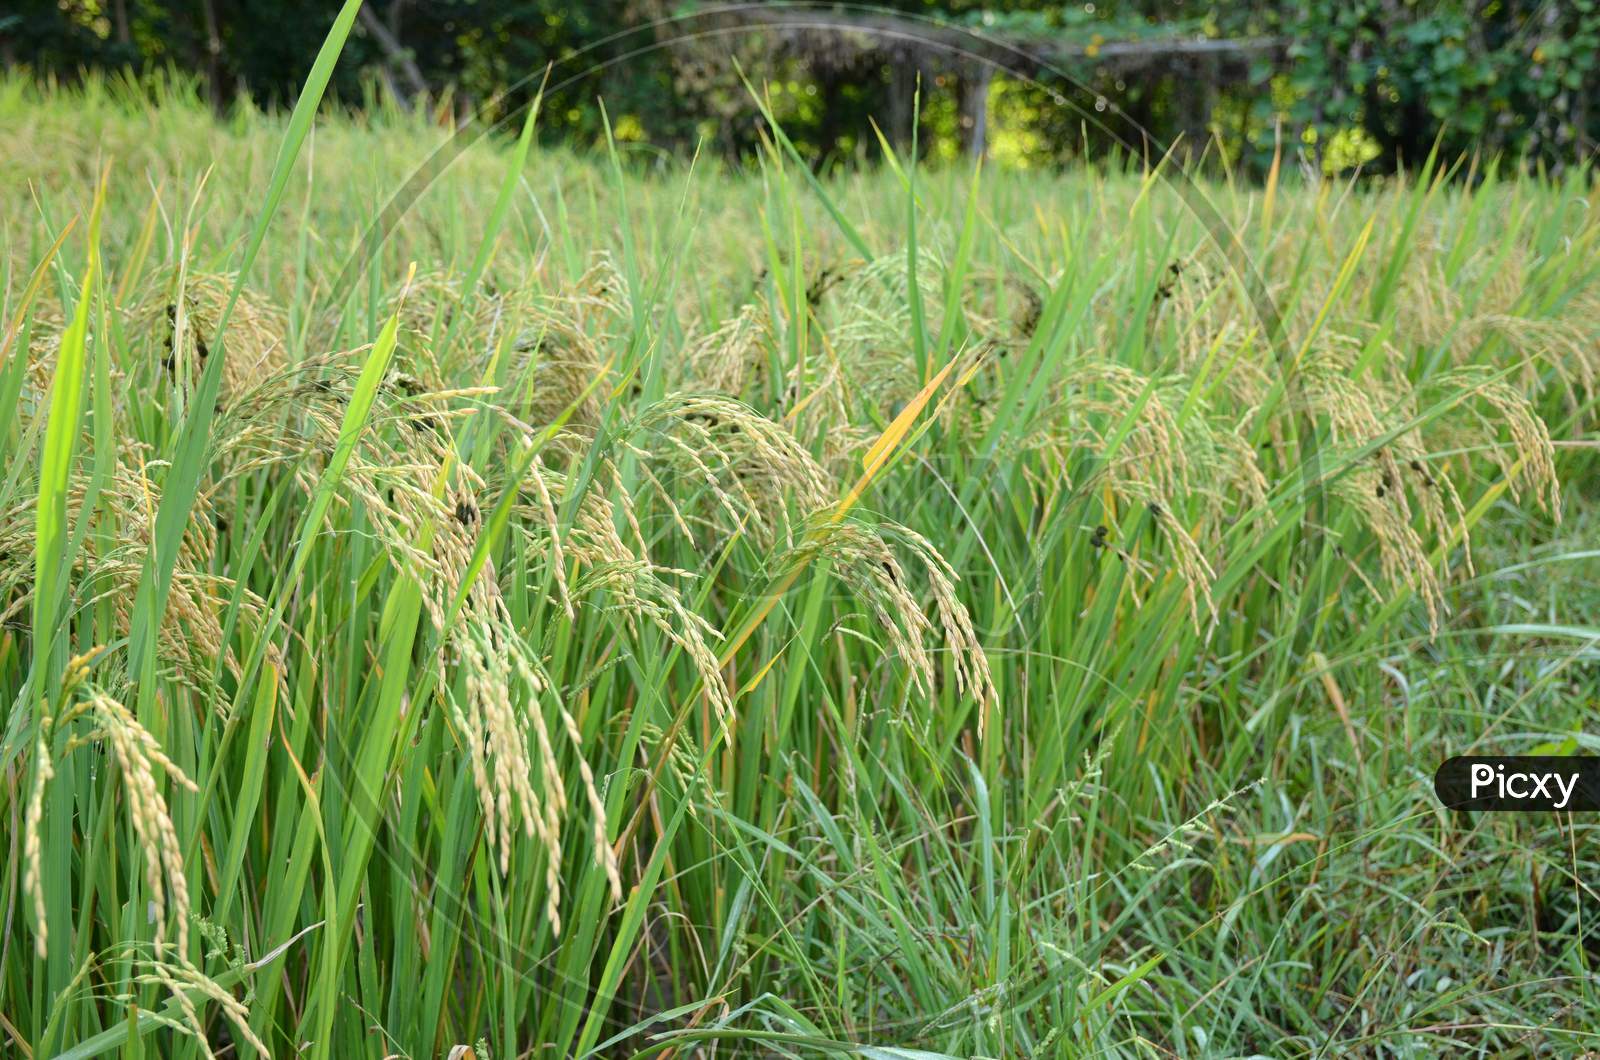 The Green Ripe Paddy Plant Grains In The Field Meadow.